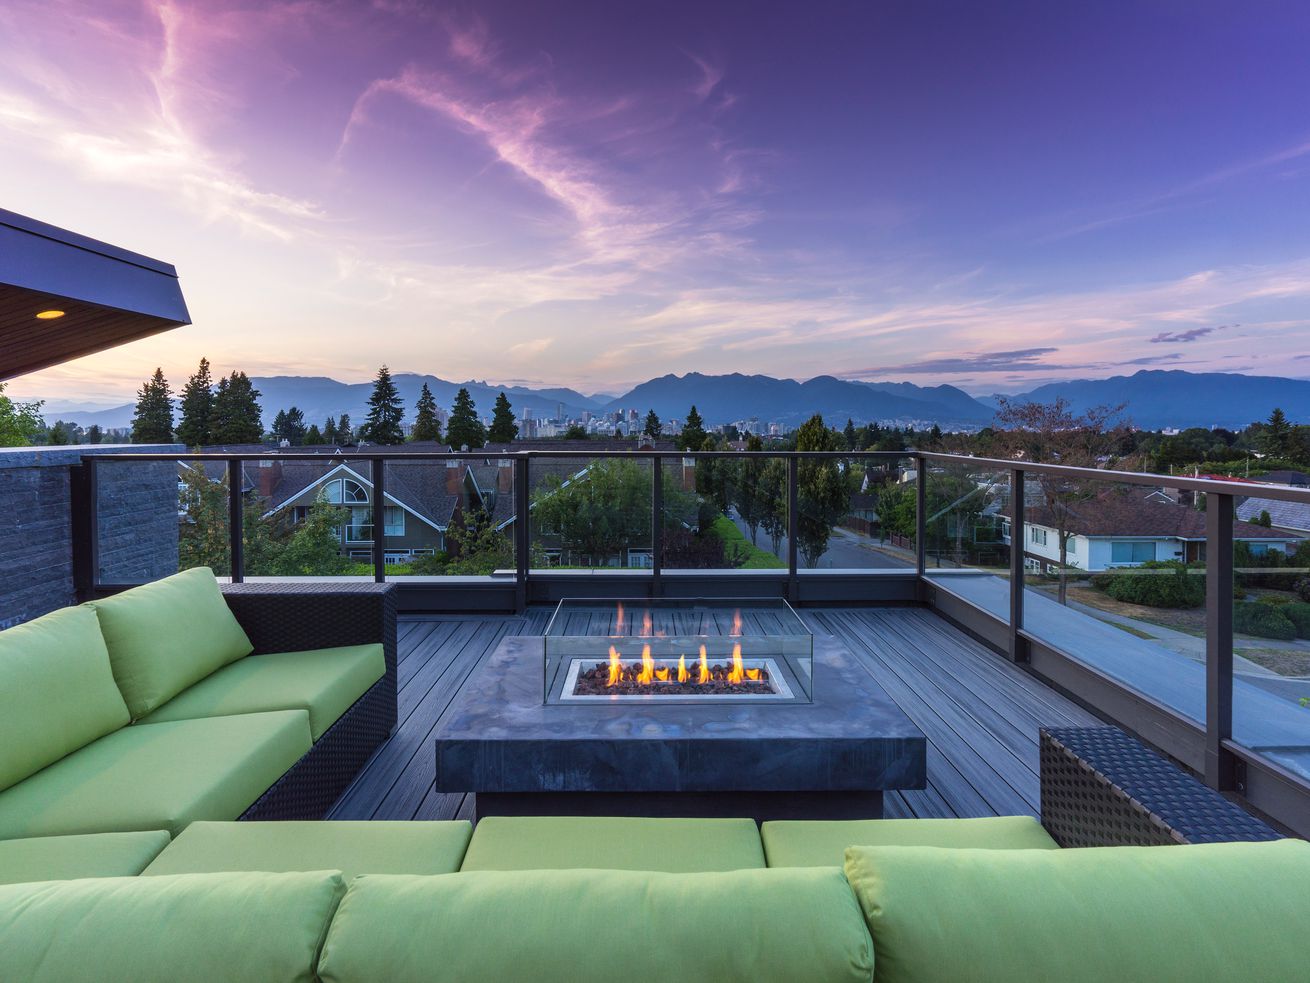 A rooftop deck with a firepit looking out to the mountains at sunset.